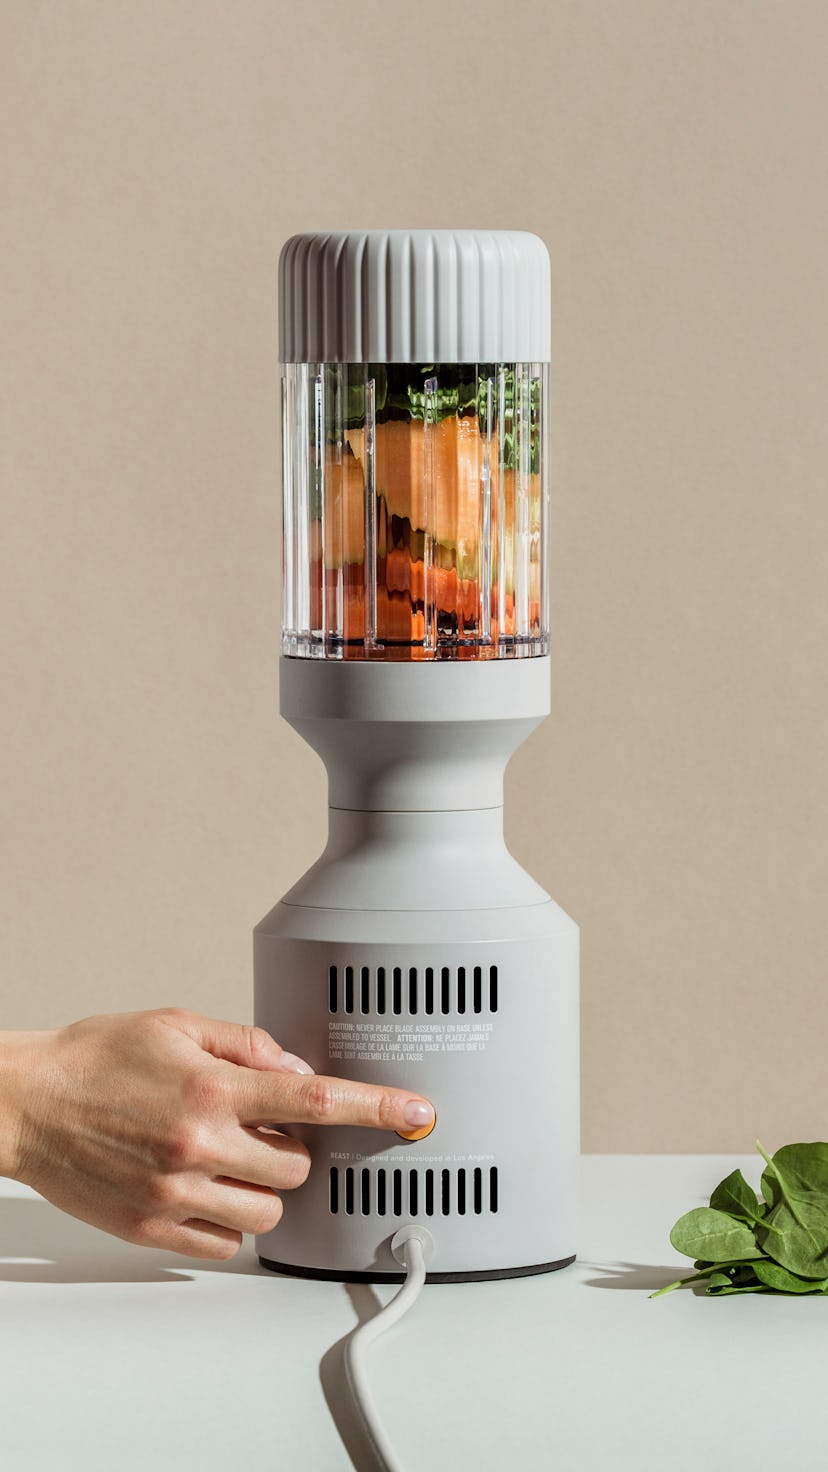 A B10 blender is seen with papaya, greens, and other fruits inside the blending glass.